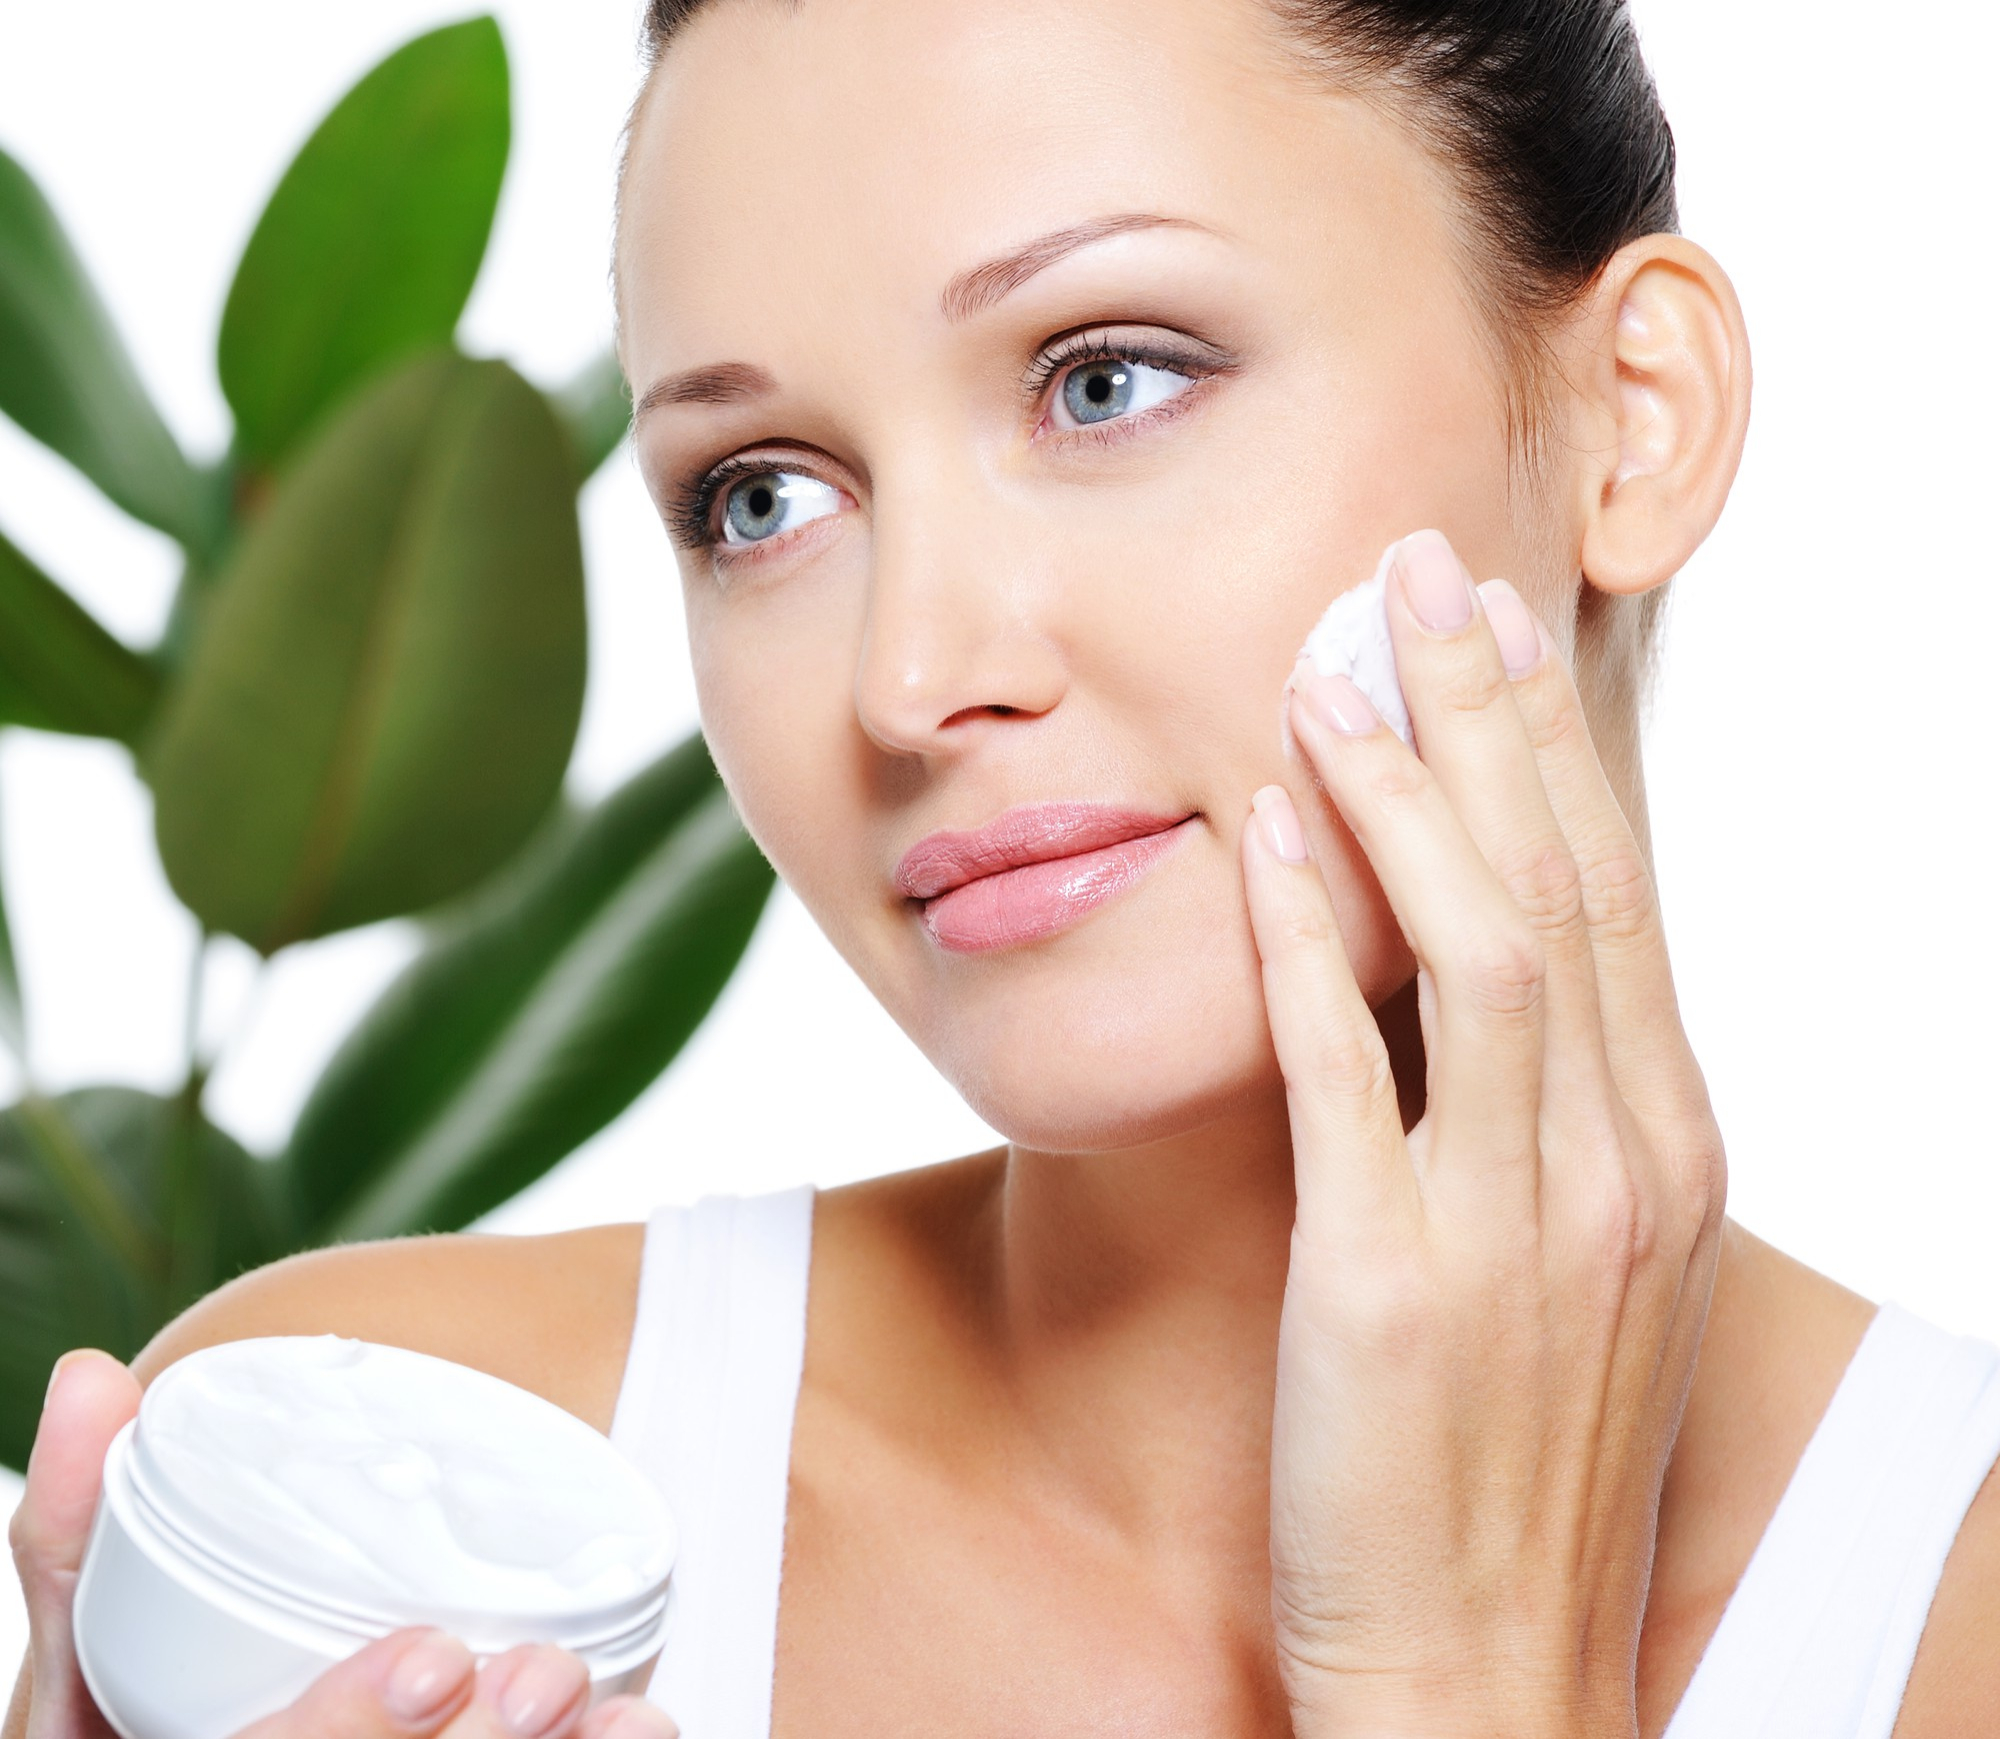 how to use cleanser, toner and moisturizer